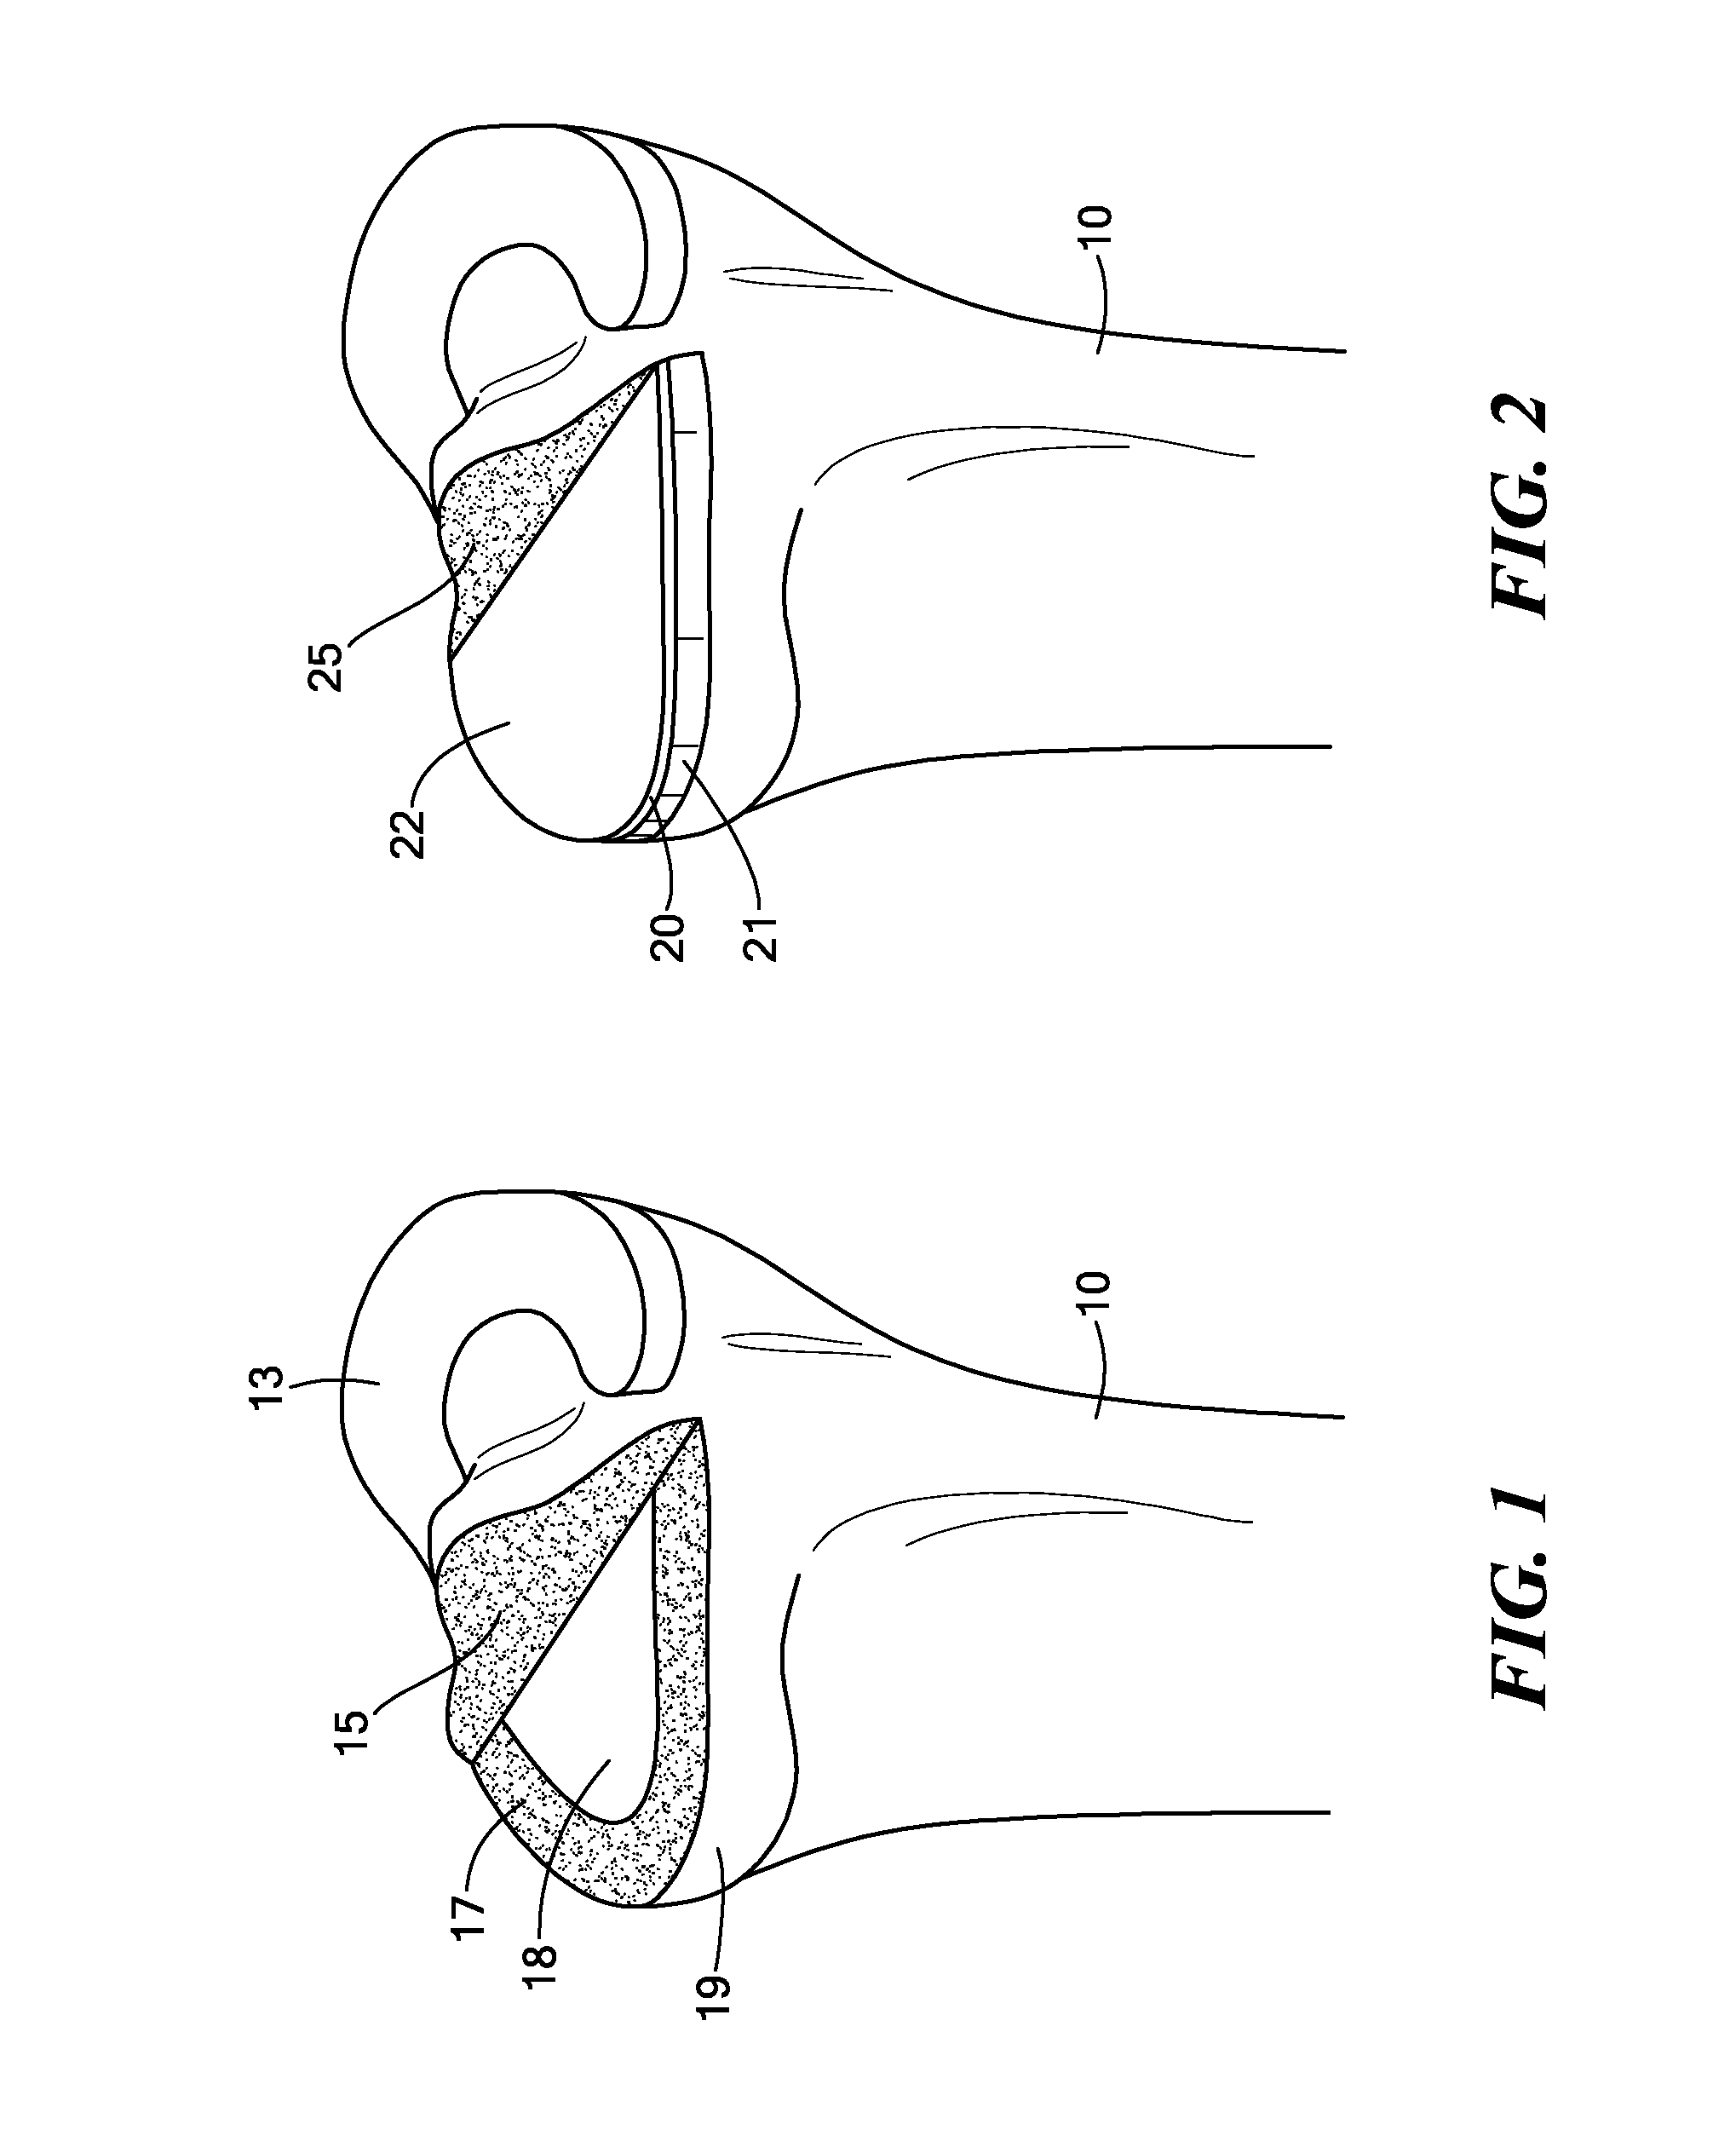 Edge-Matched Articular Implant